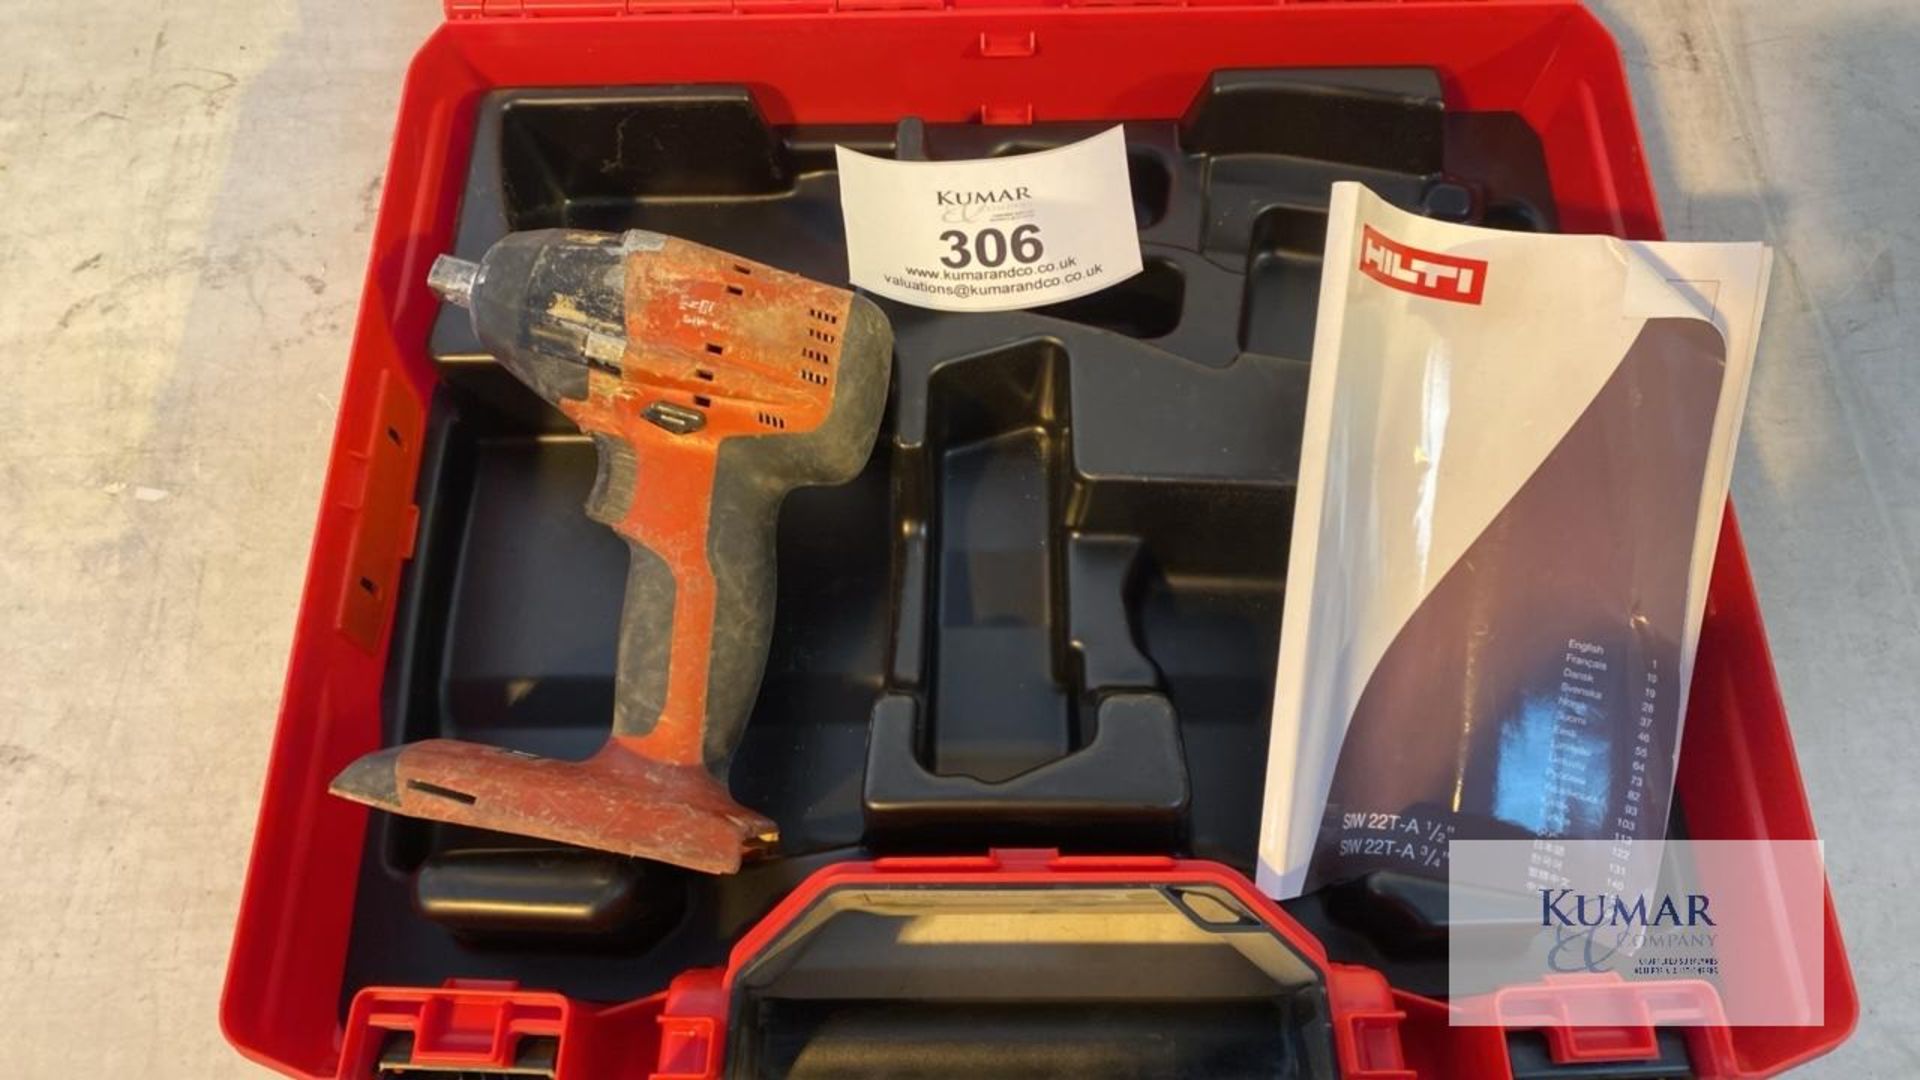 Hilti 1/2" Impact Gun (no battery) in Carry Case - Image 2 of 5